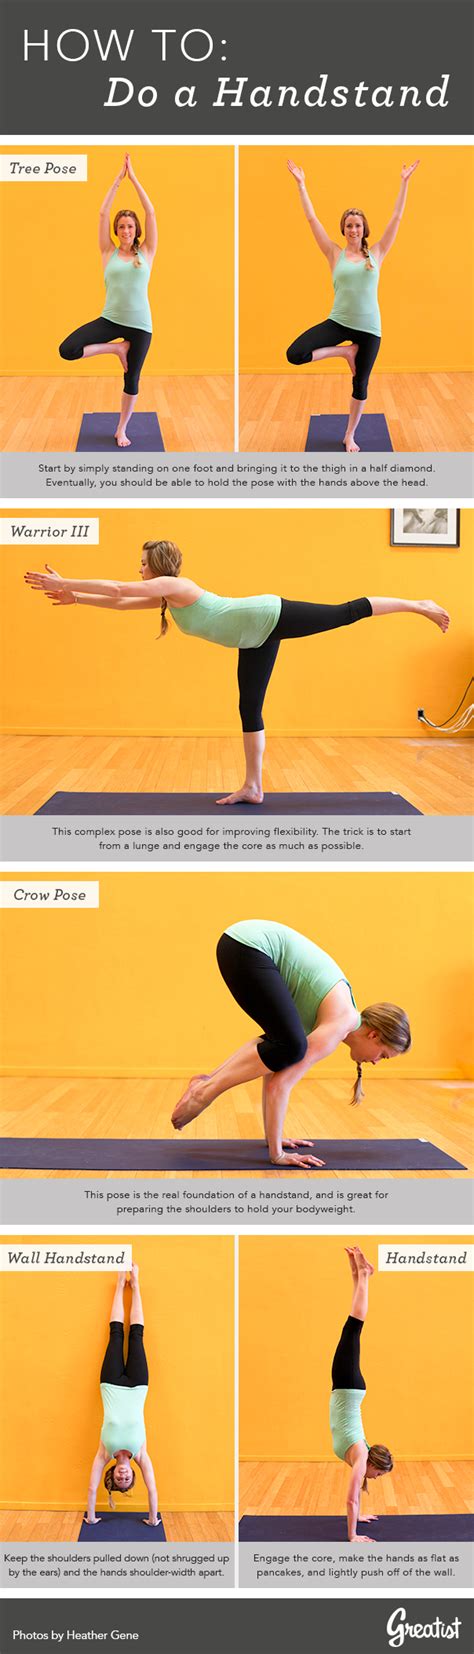 How To Do A Handstand Pictures Photos And Images For Facebook Tumblr